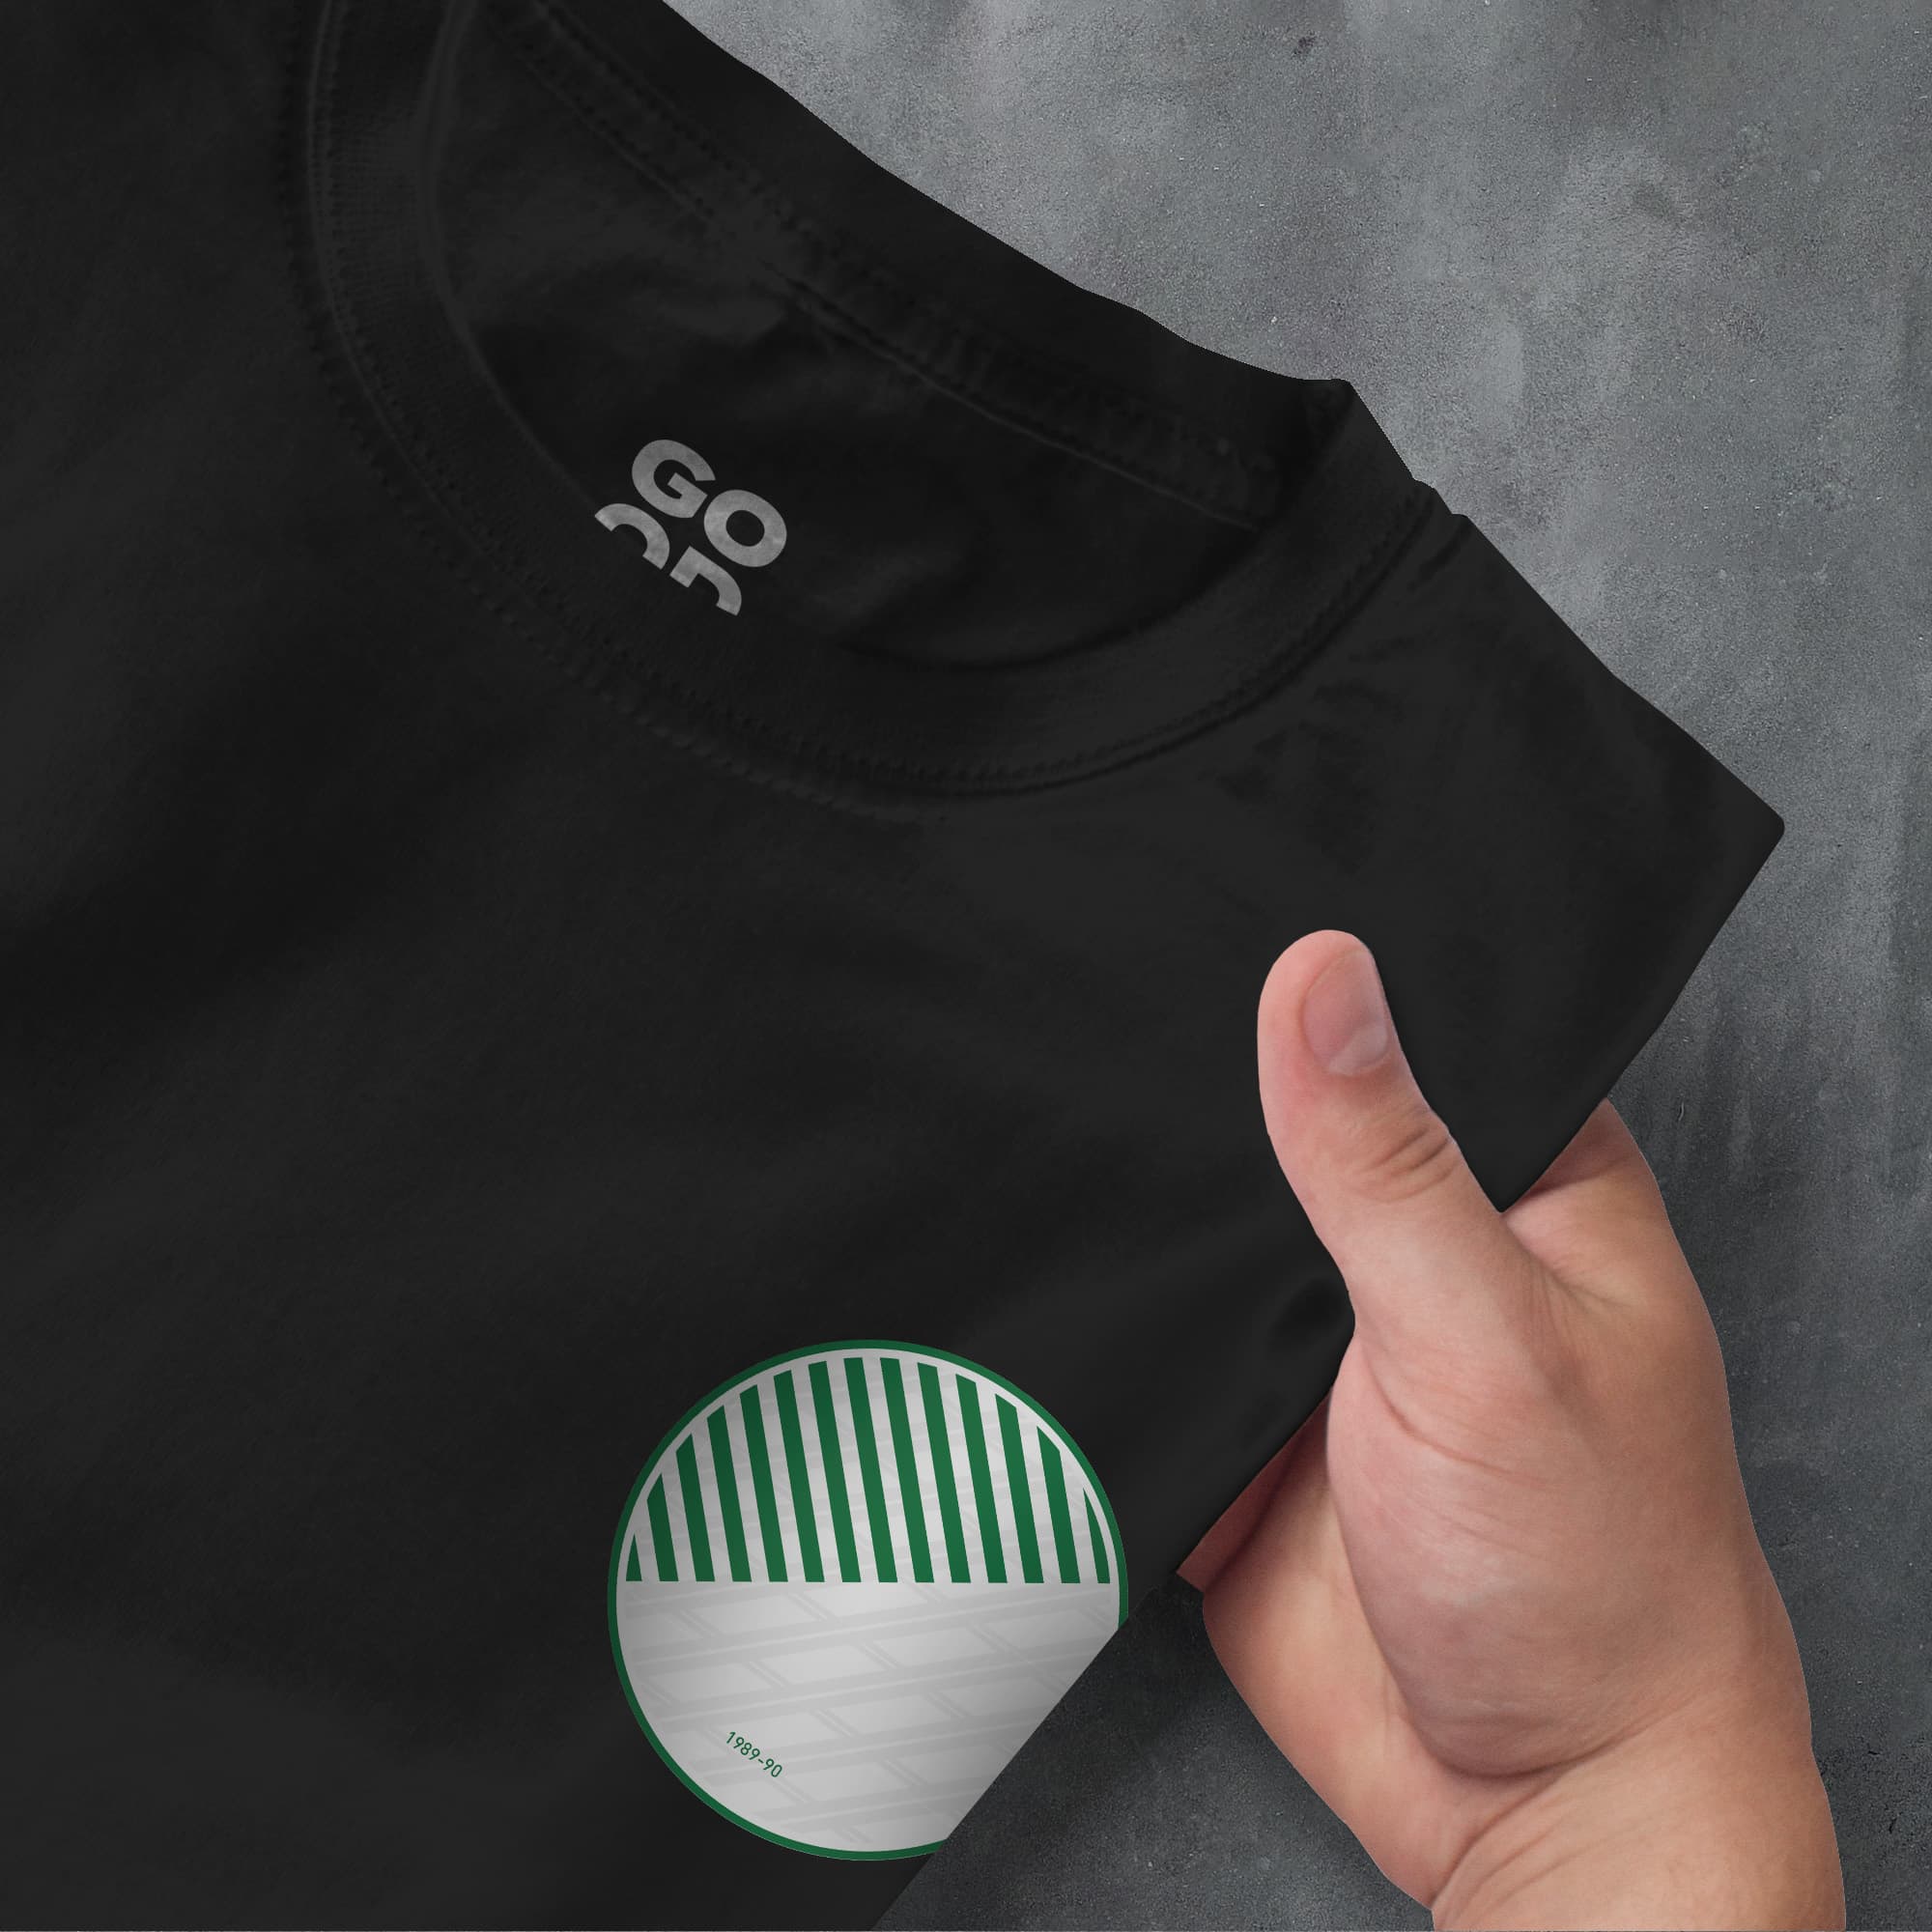 a person pointing at a black shirt with a green and white design on it